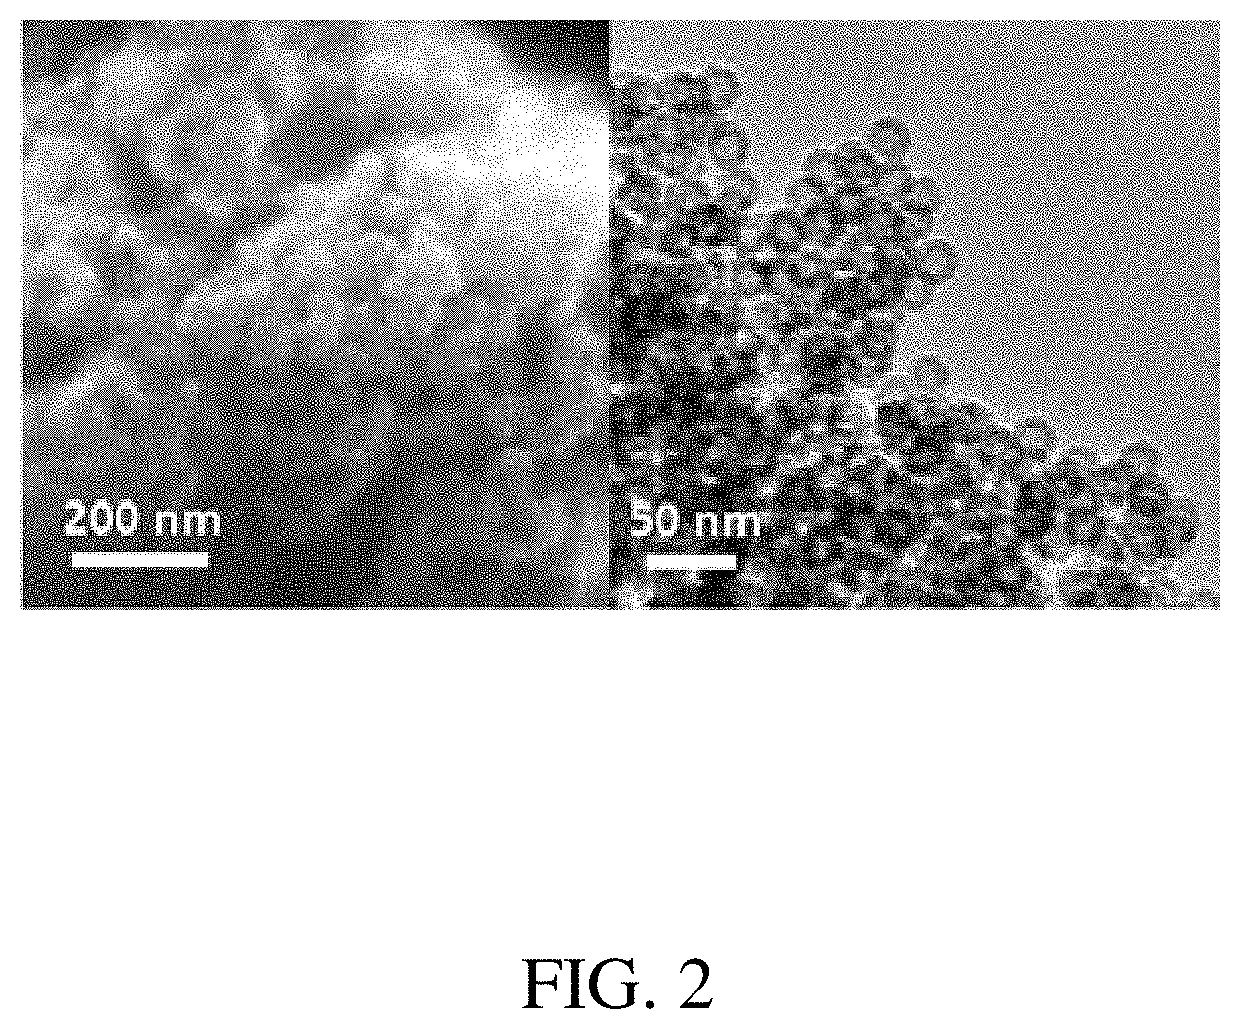 Porous thermally insulating compositions containing hollow spherical nanoparticles